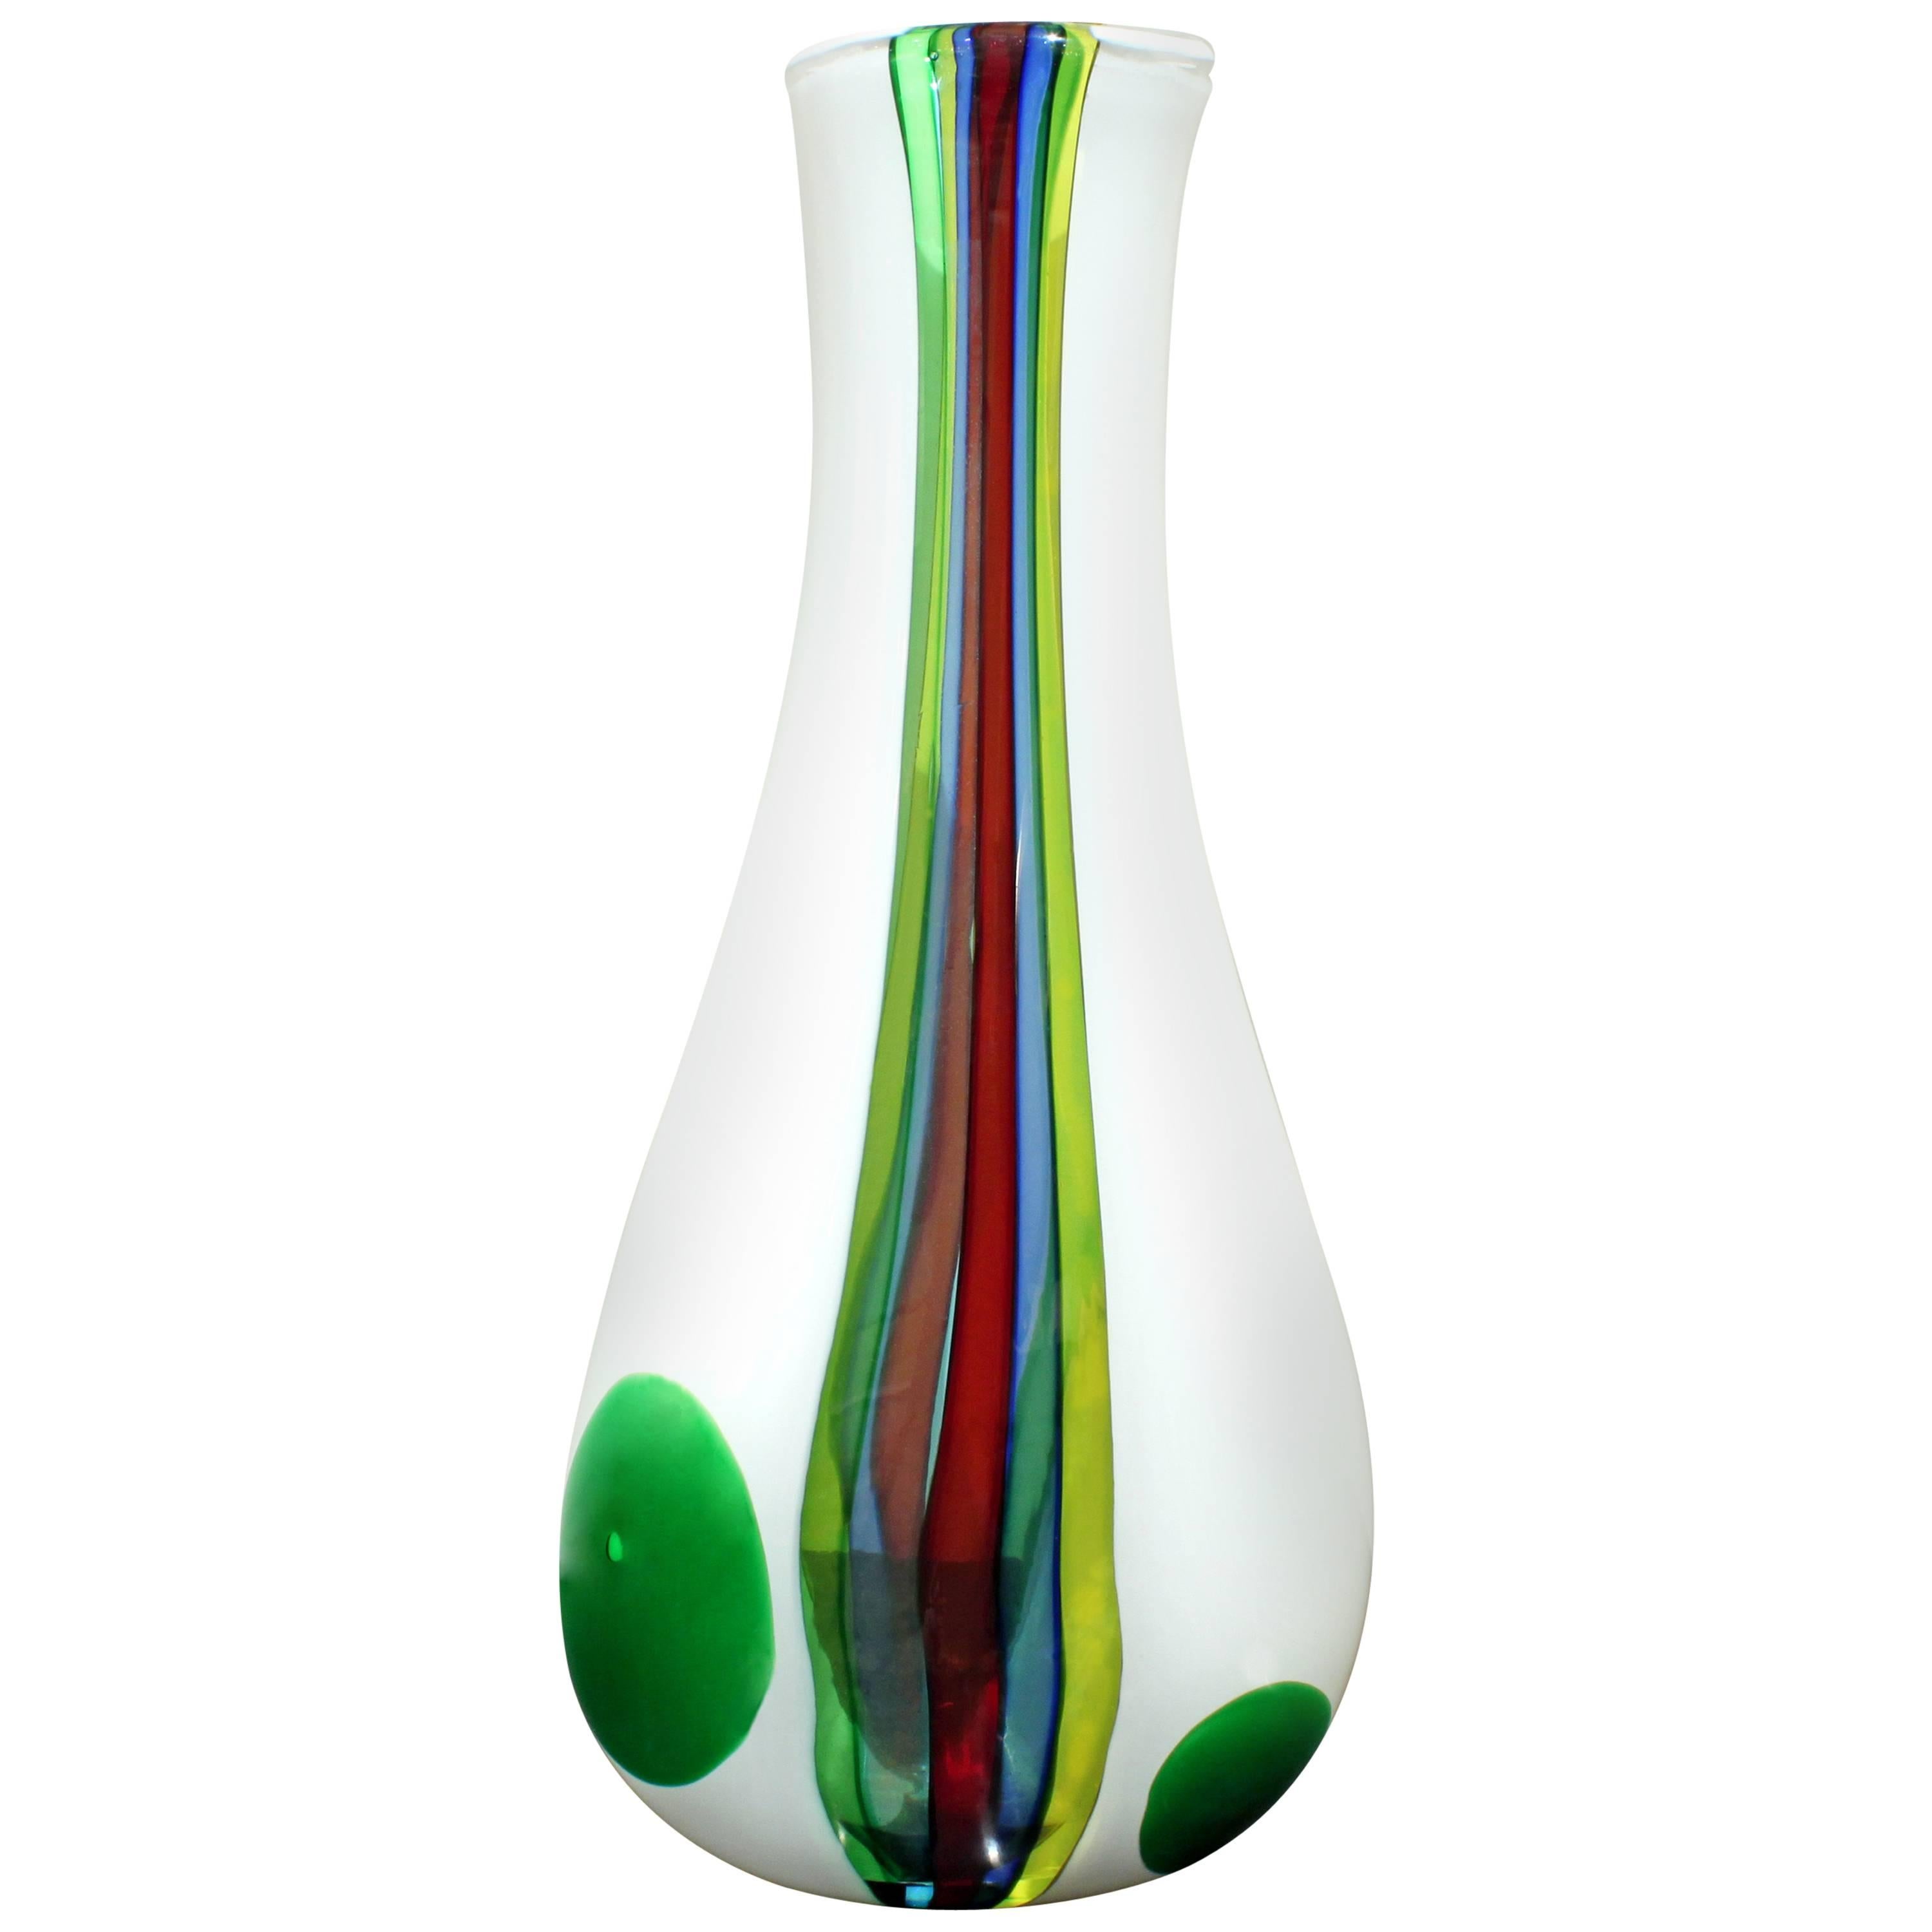 Exceptional Handblown "Spots" Vase by Anzolo Fuga for A.V.E.M.